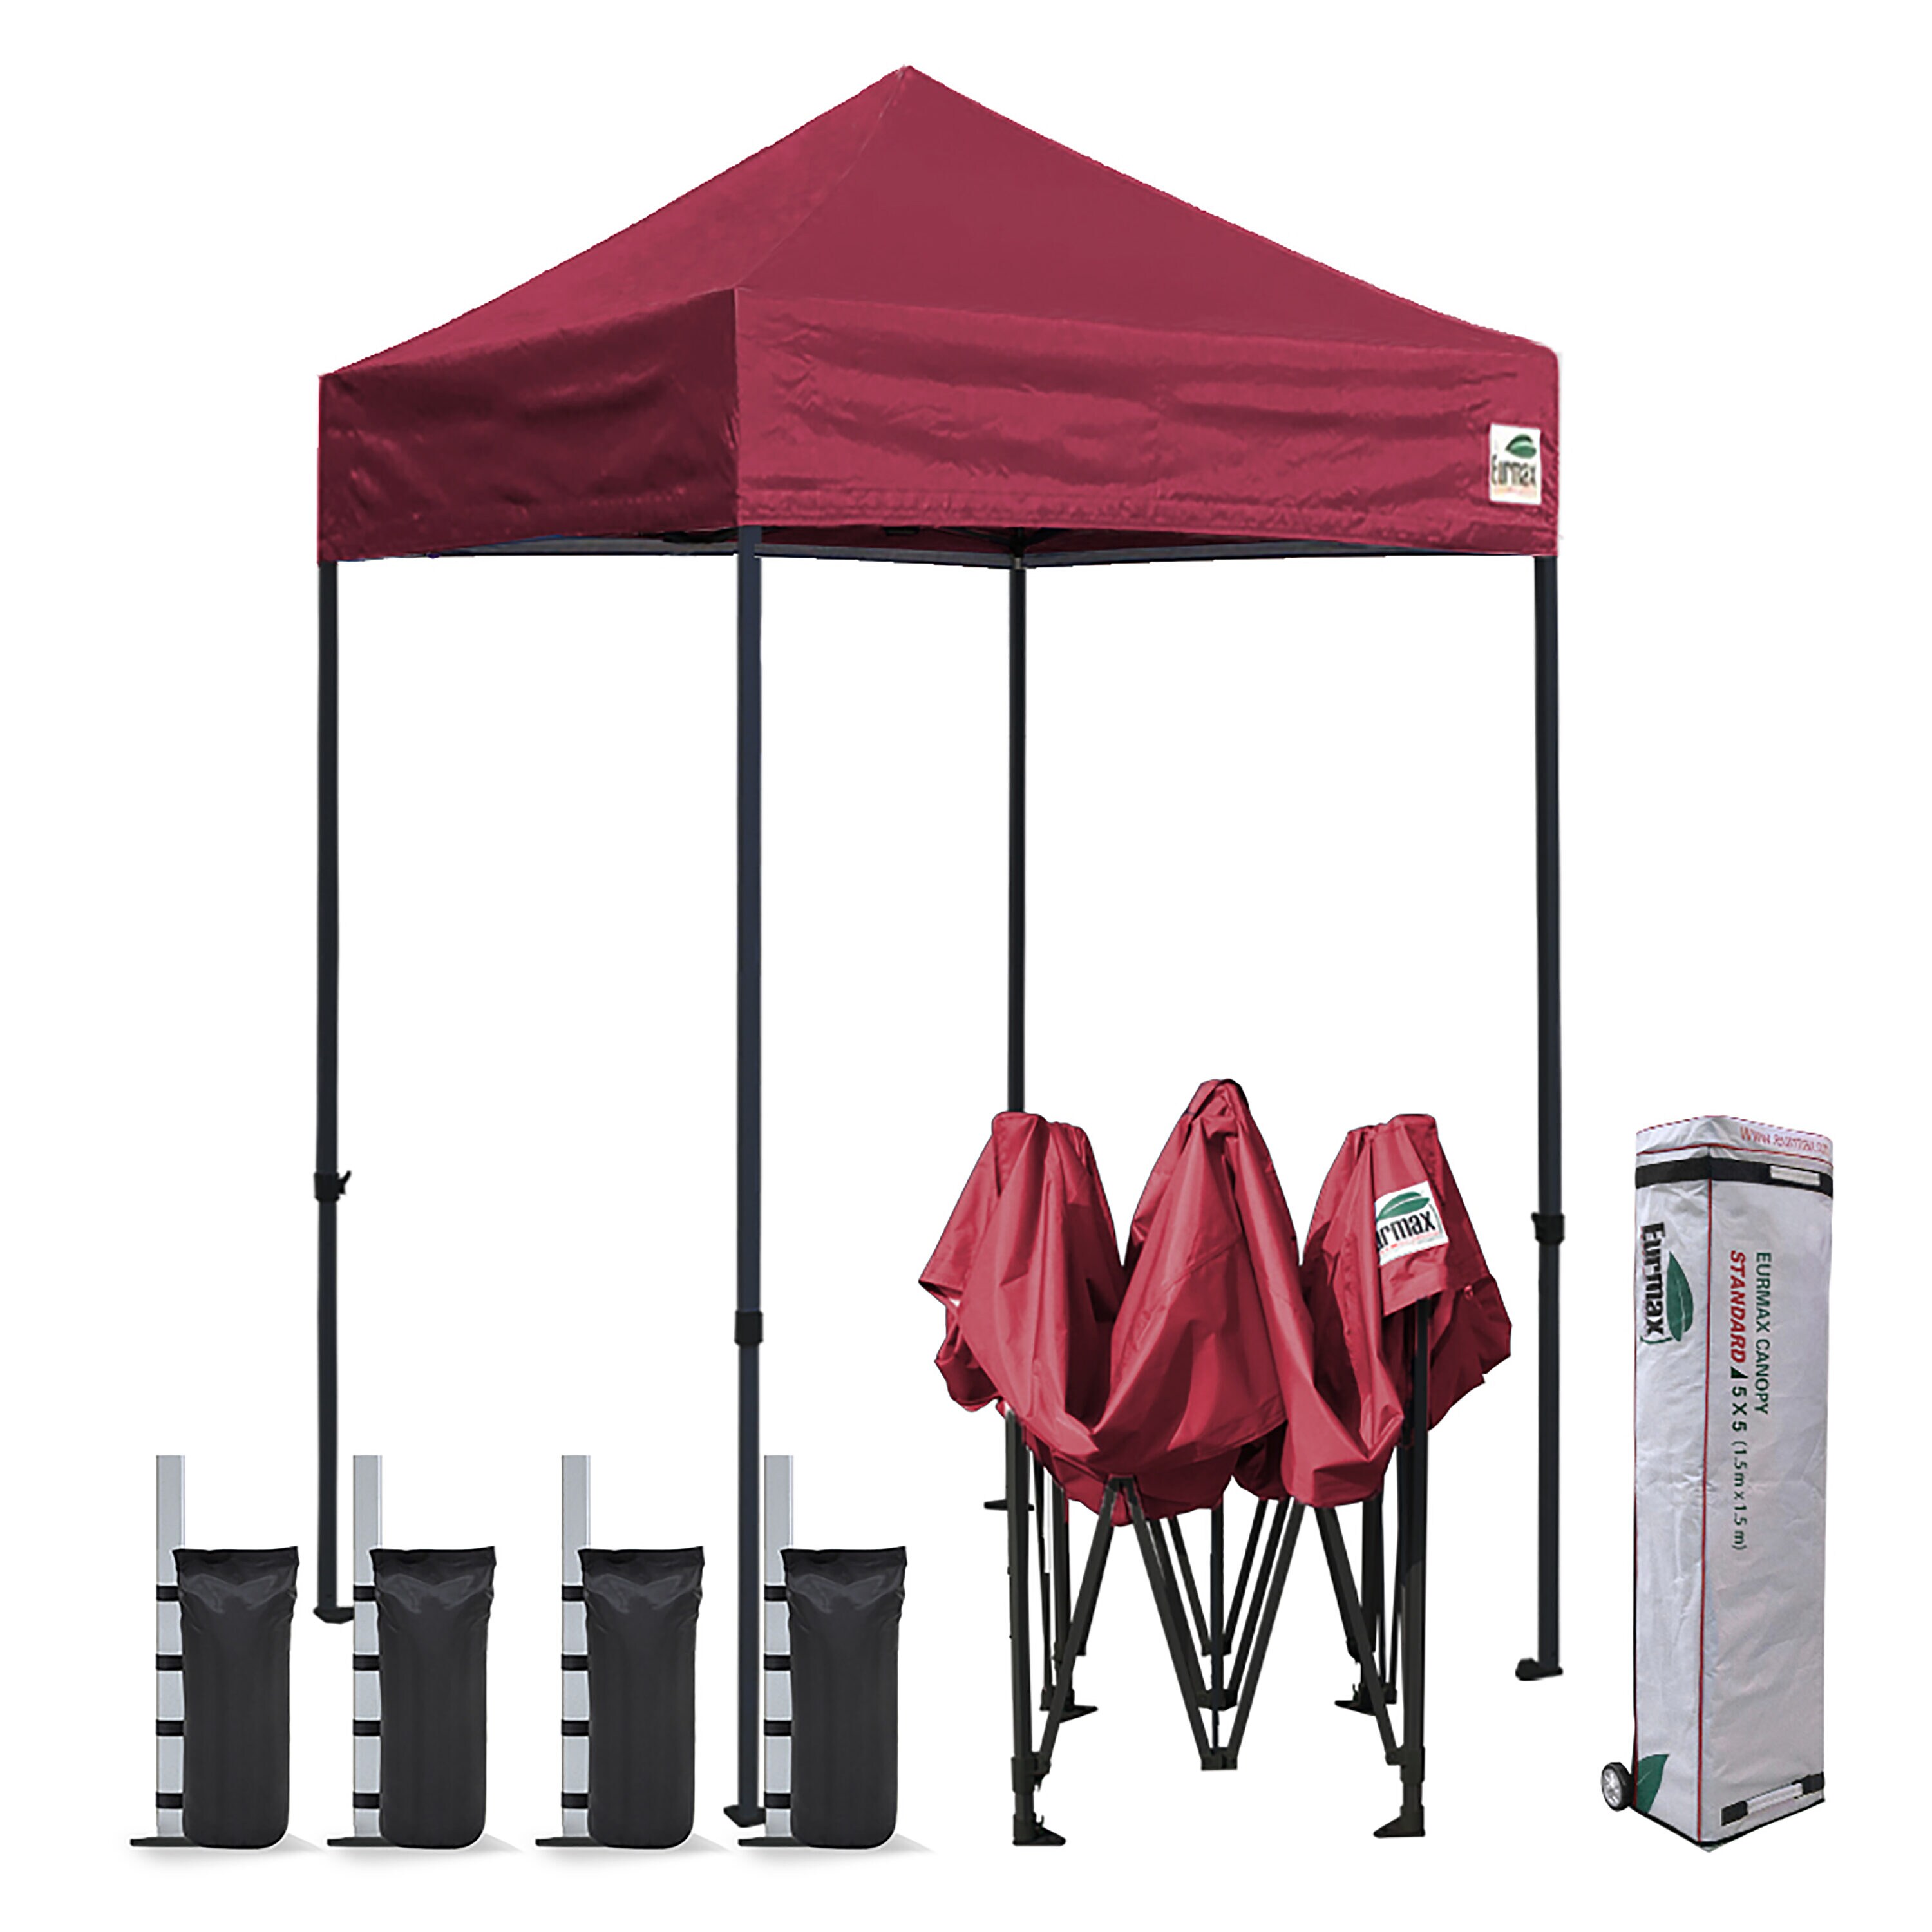 Eurmax 5-ft x 5-ft Square Burgundy Pop-up Canopy in the